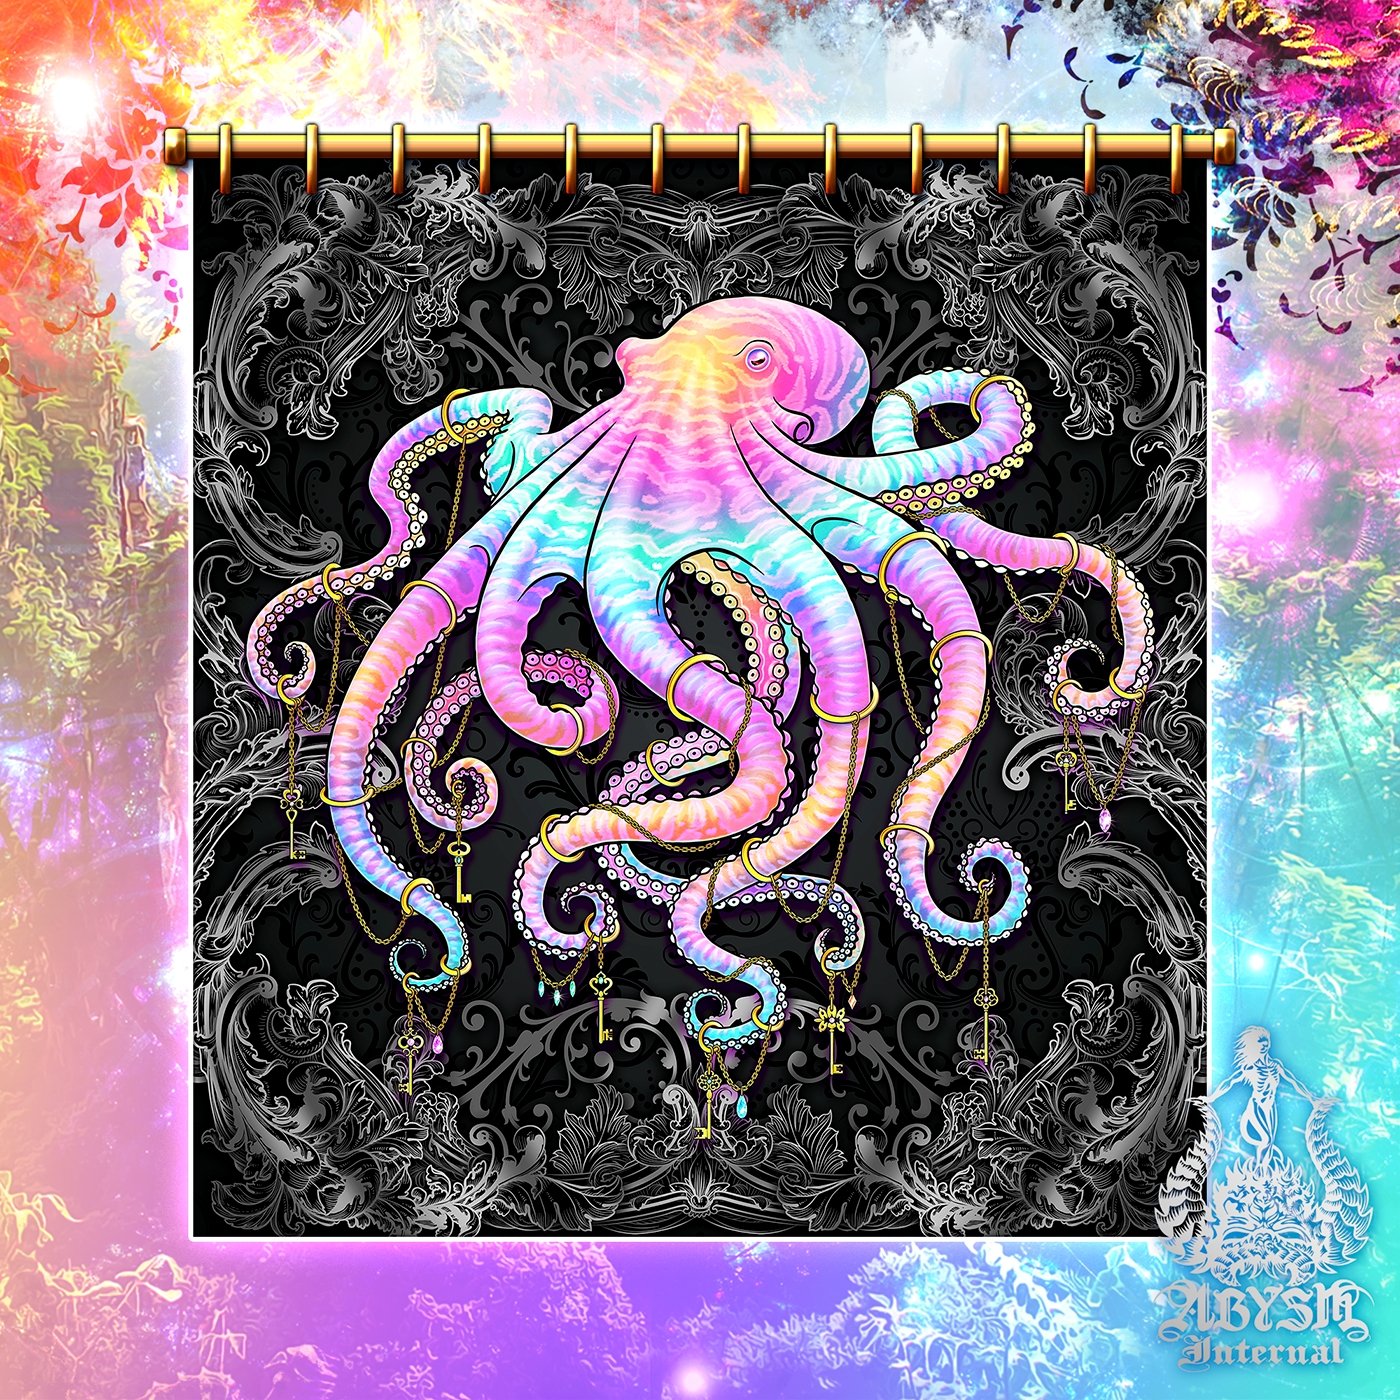 Octopus Shower Curtain, Indie and Alternative Bathroom Decor, Eclectic and Funky Home - Dark Pastel Punk - Abysm Internal